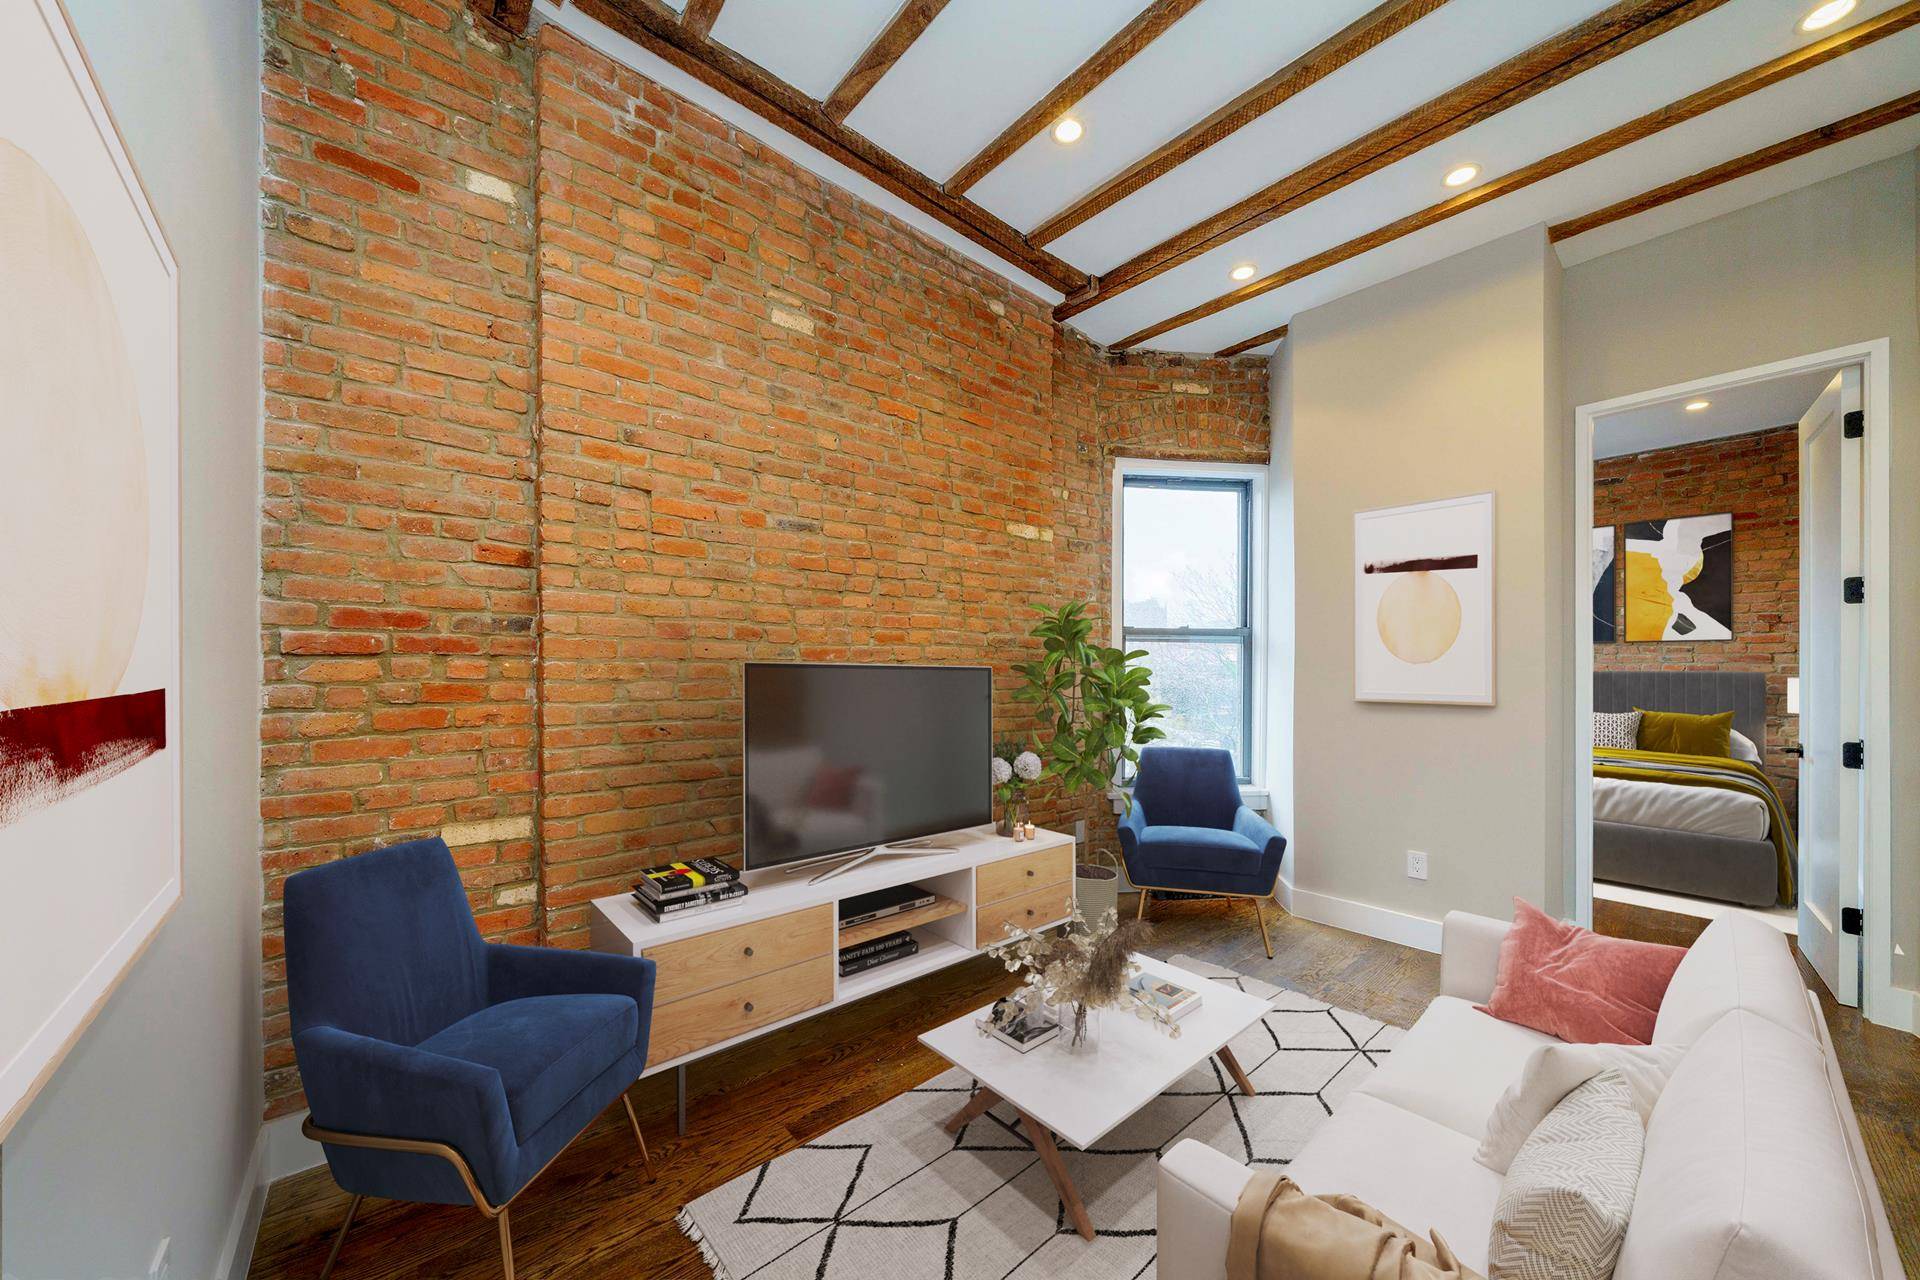 AVAILABLE JUNE 1 OPEN HOUSE IS BY APPOINTMENT2 BEDS 2 FULL BATHSWASHER DRYER IN UNIT PRIME WEST VILLAGE BEAUTIFUL GUT RENOVATED 2 BEDROOM 2 FULL BATHROOM WITH W D IN ...